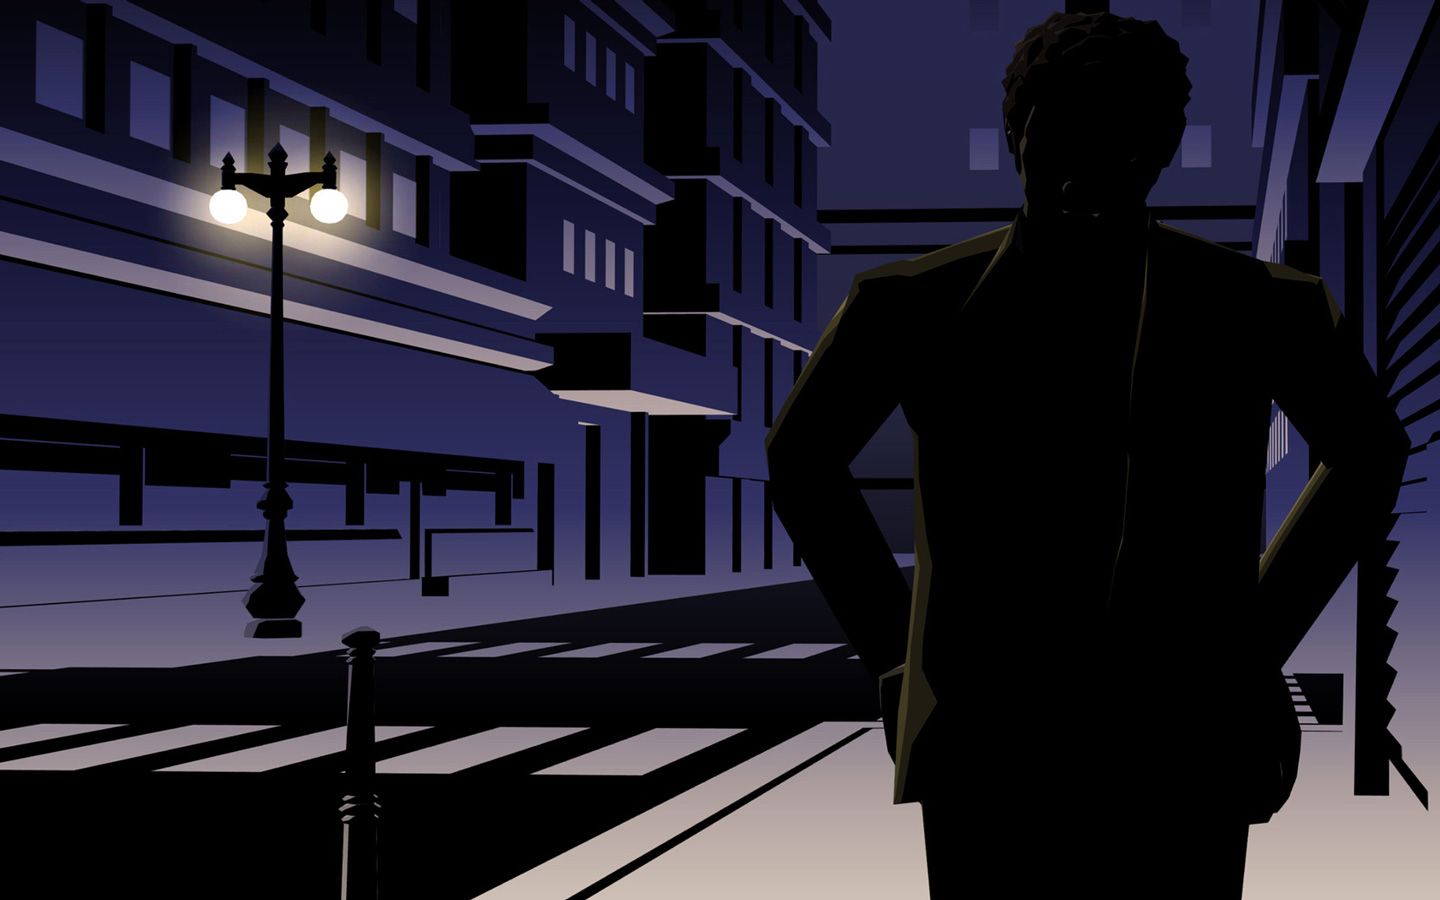 A man in a suit stands on a city street at night. - 1440x900